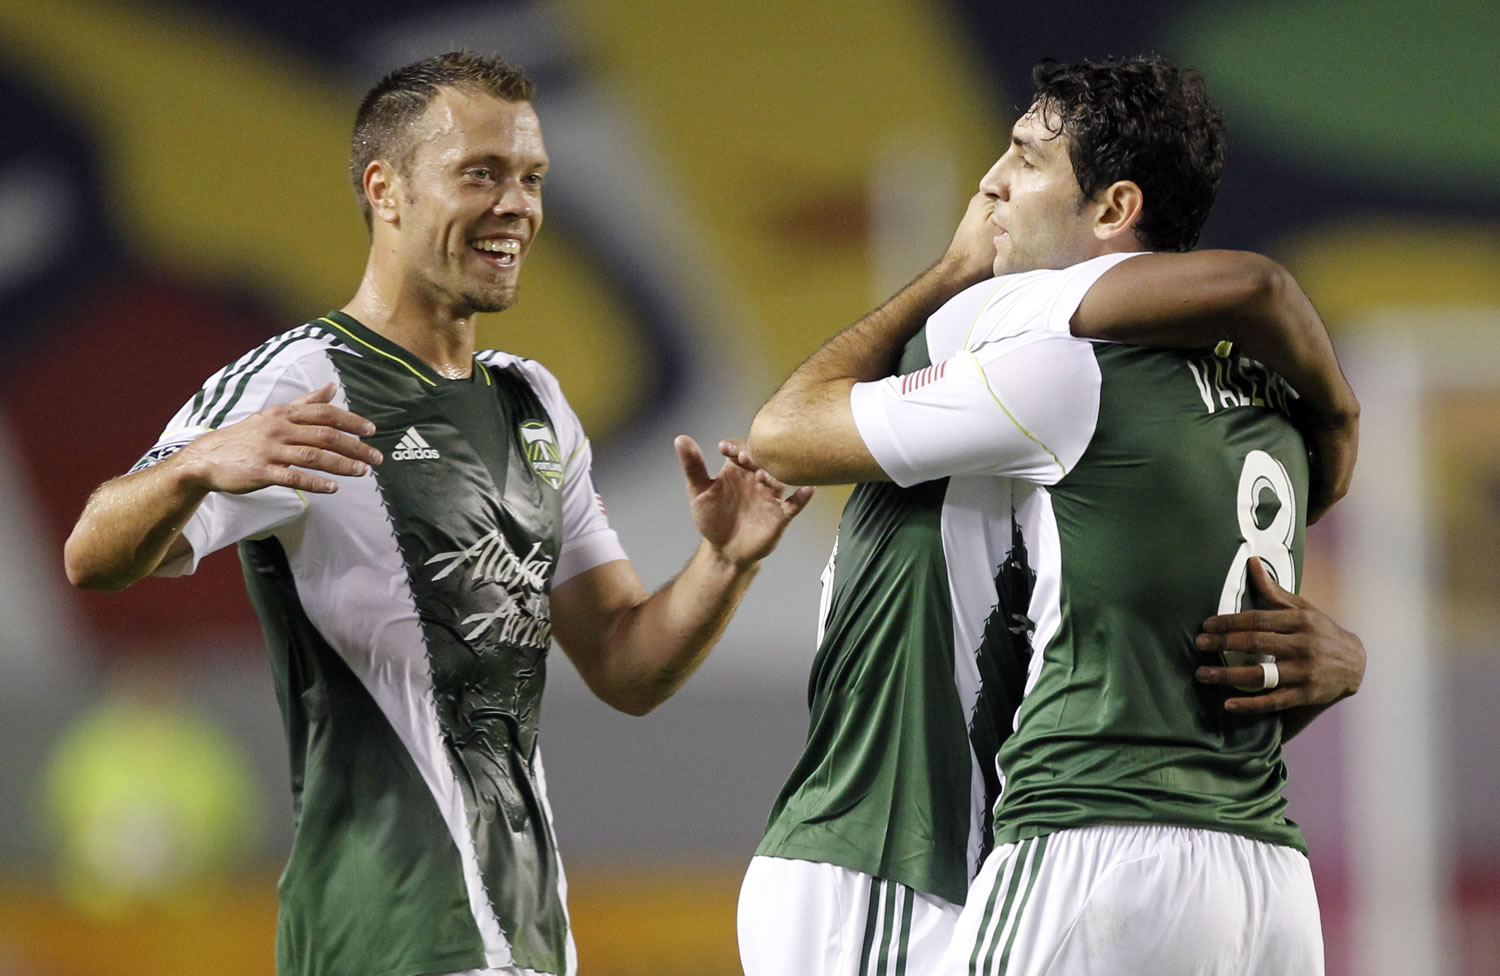 Portland Timbers defender Jack Jewsbury, left, comes in to celebrate with Timbers midfielder Darlington Nagbe, center, after Portland Timbers forward Diego Valeri's, right, second goal against Chivas USA during the first half of an MLS soccer match, Saturday, Oct. 26, 2013, in Carson, Calif.